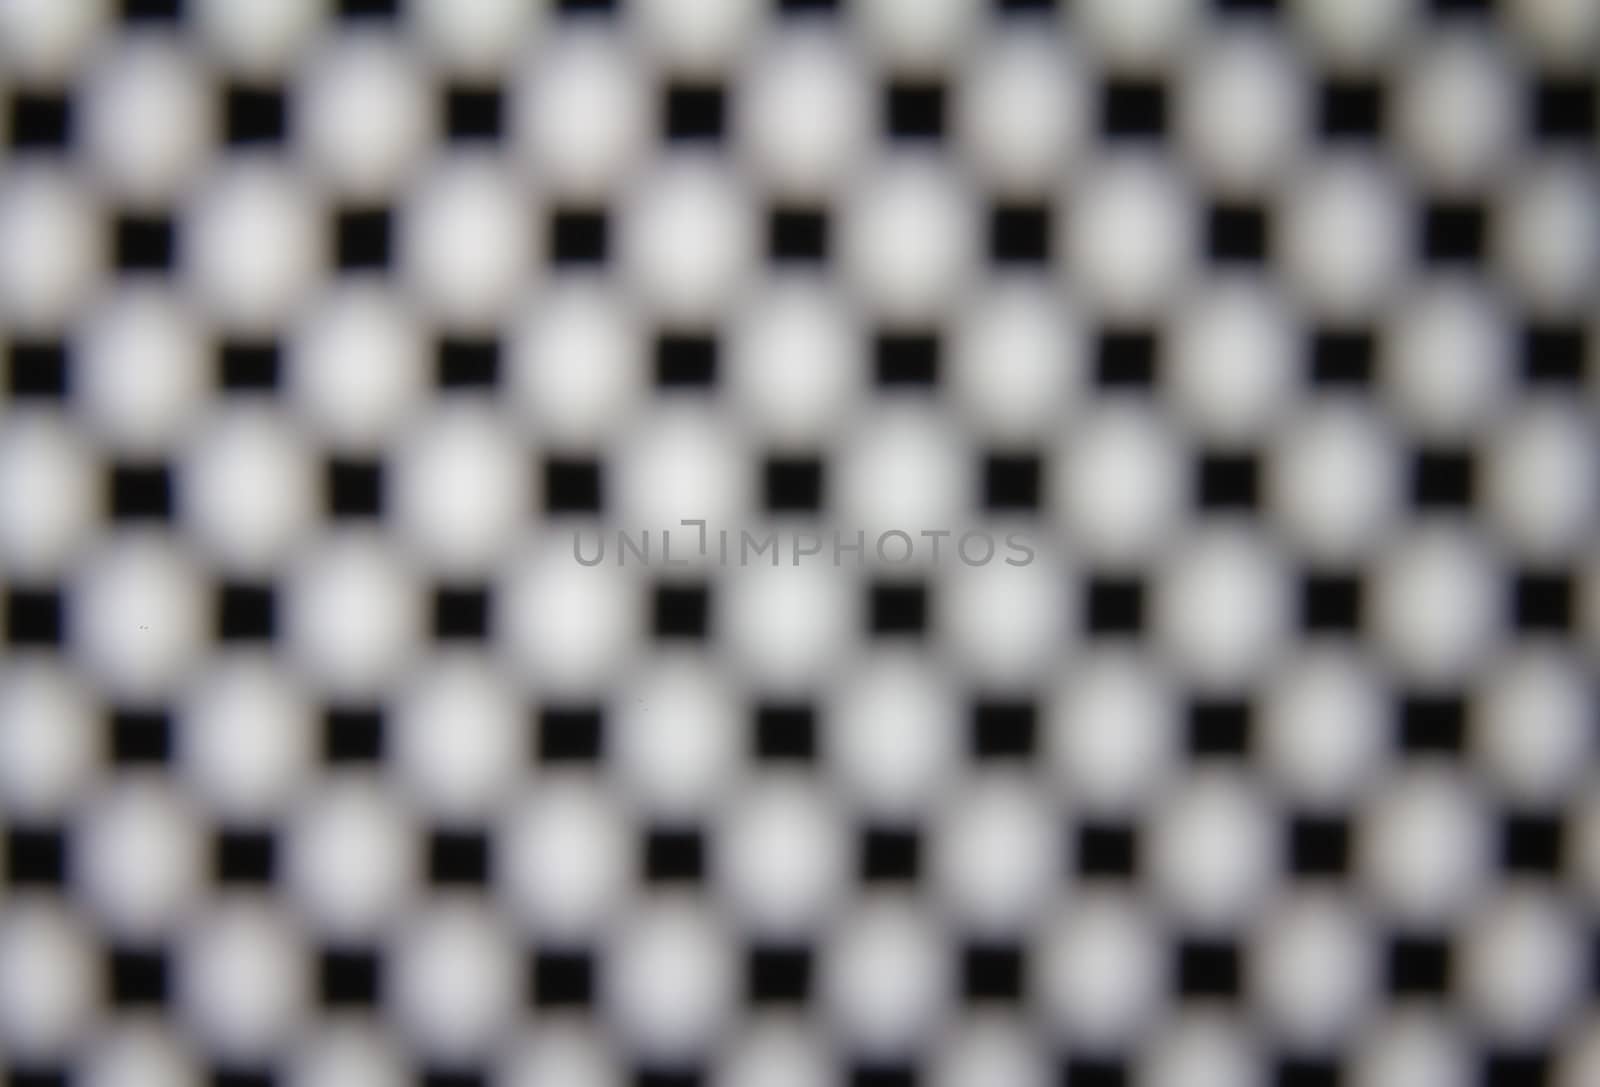 The squre dot grid with Blur focus for the backdrop or wallpaper